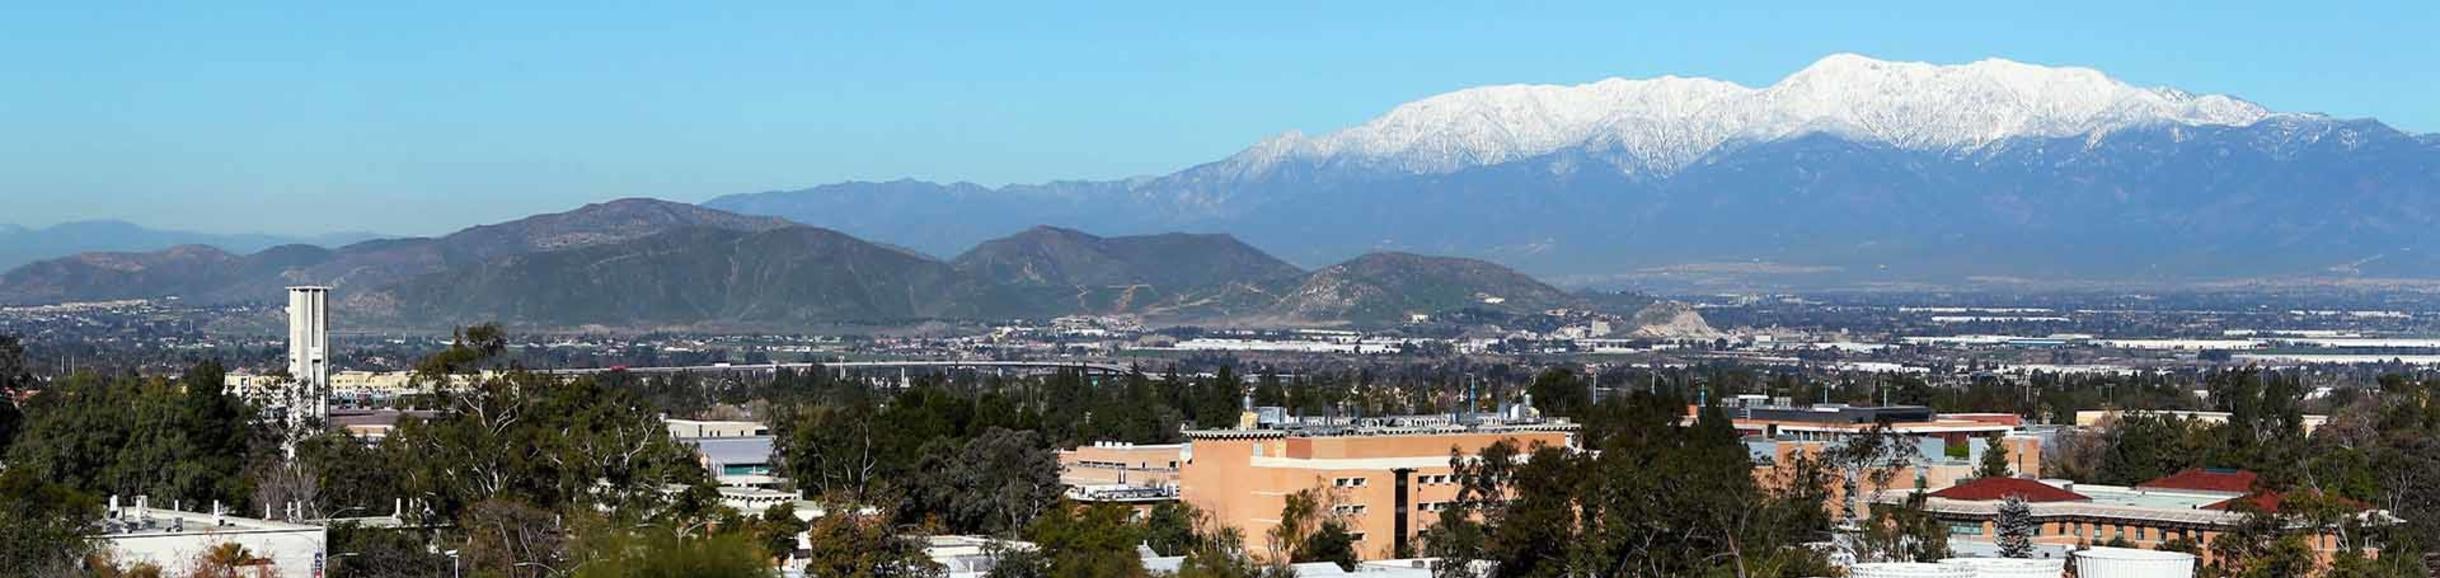 UCR campus with snow-capped mountains c) UCR / Stan Lim